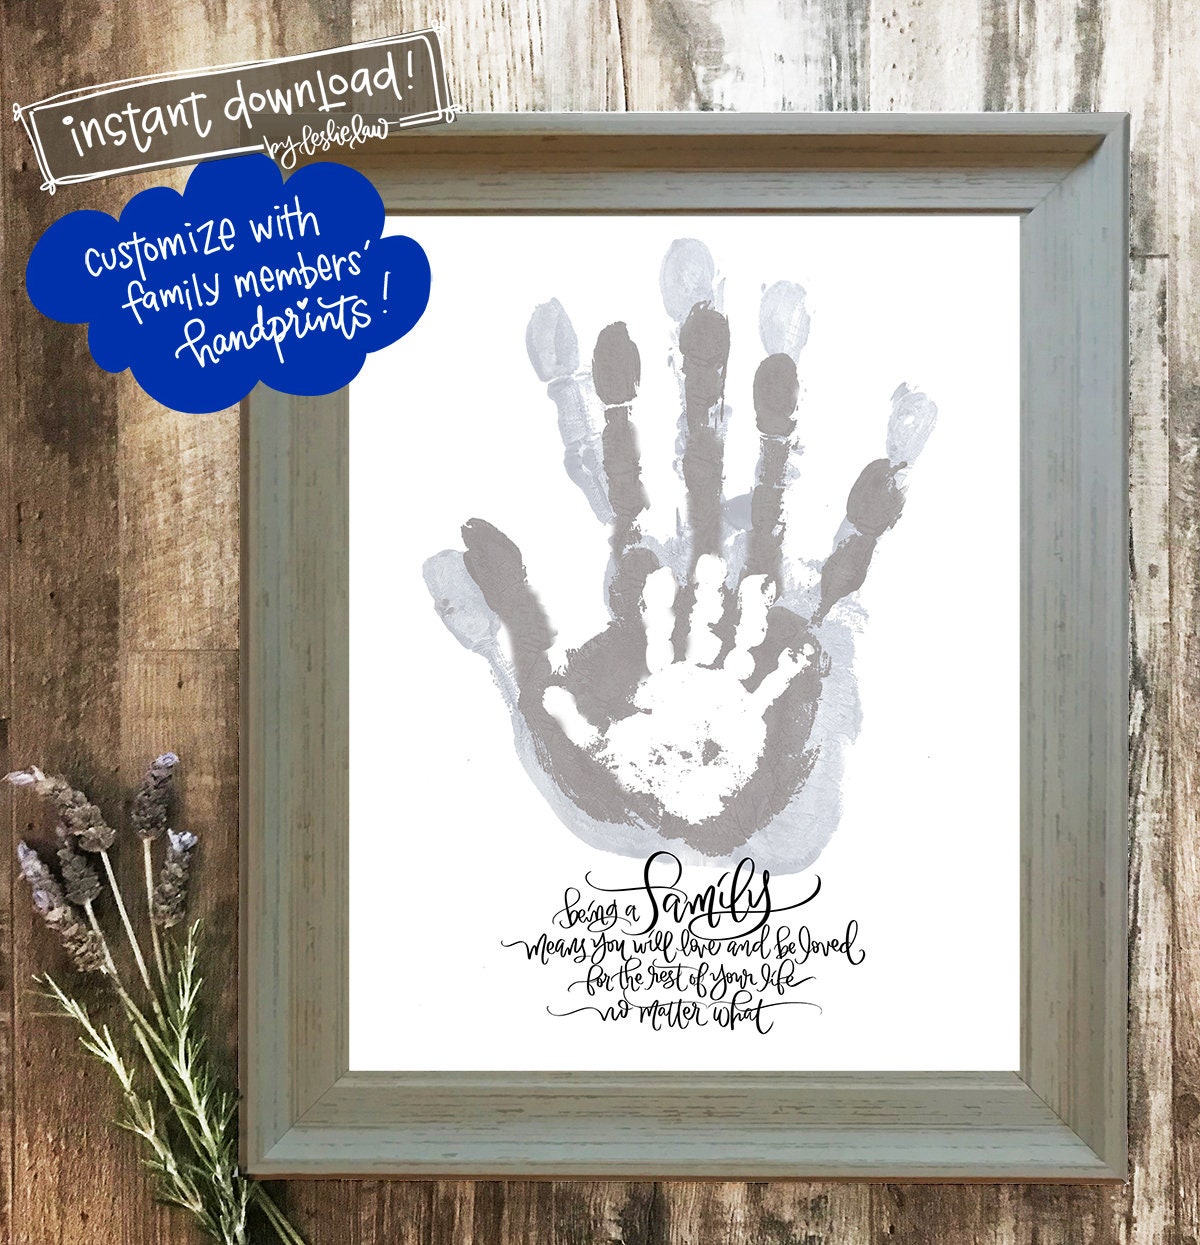 FAMILY HANDPRINT Embroidery Keepsake Kit Trace and Stitch handprint  outlines NEW